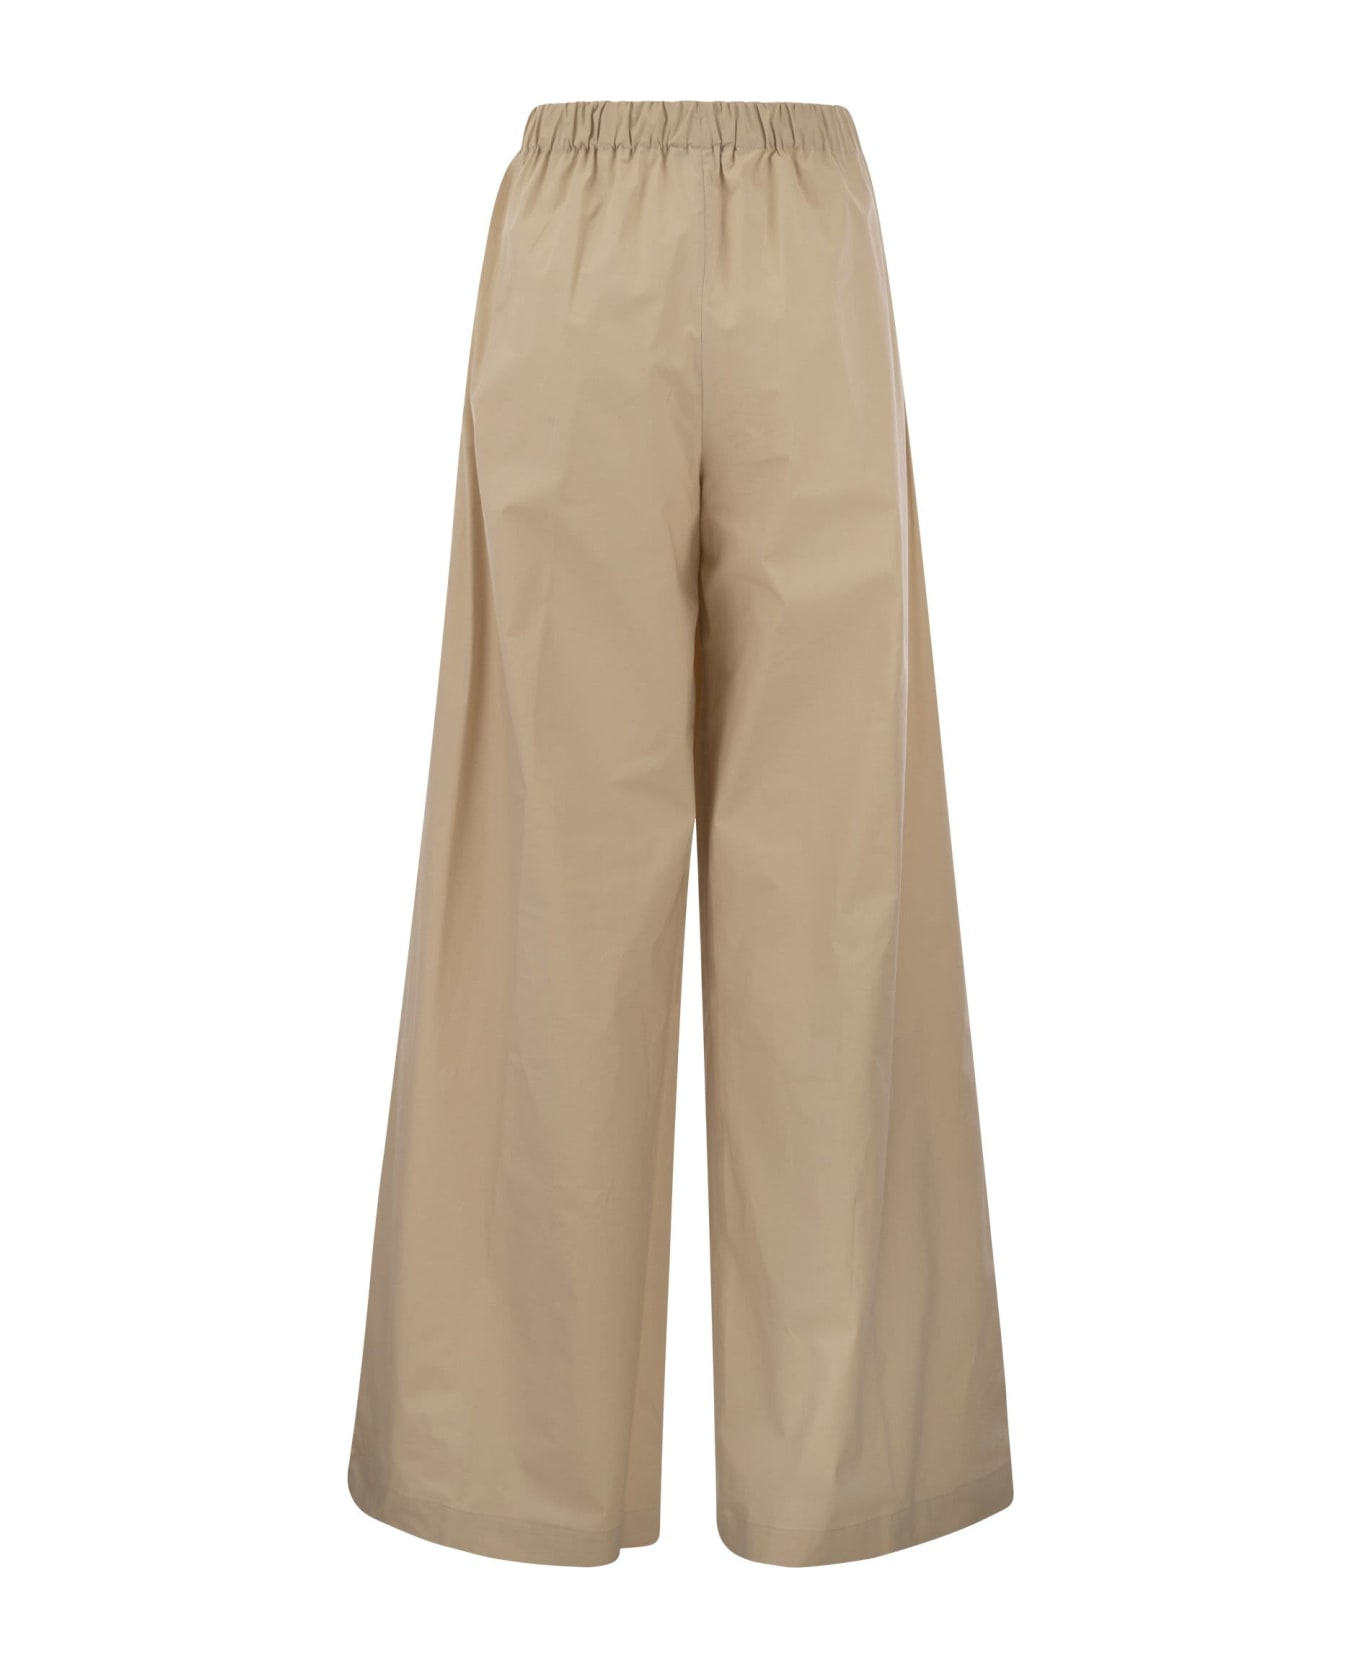 Antonelli Steven - Stretch Cotton Loose-fitting Trousers - Beige